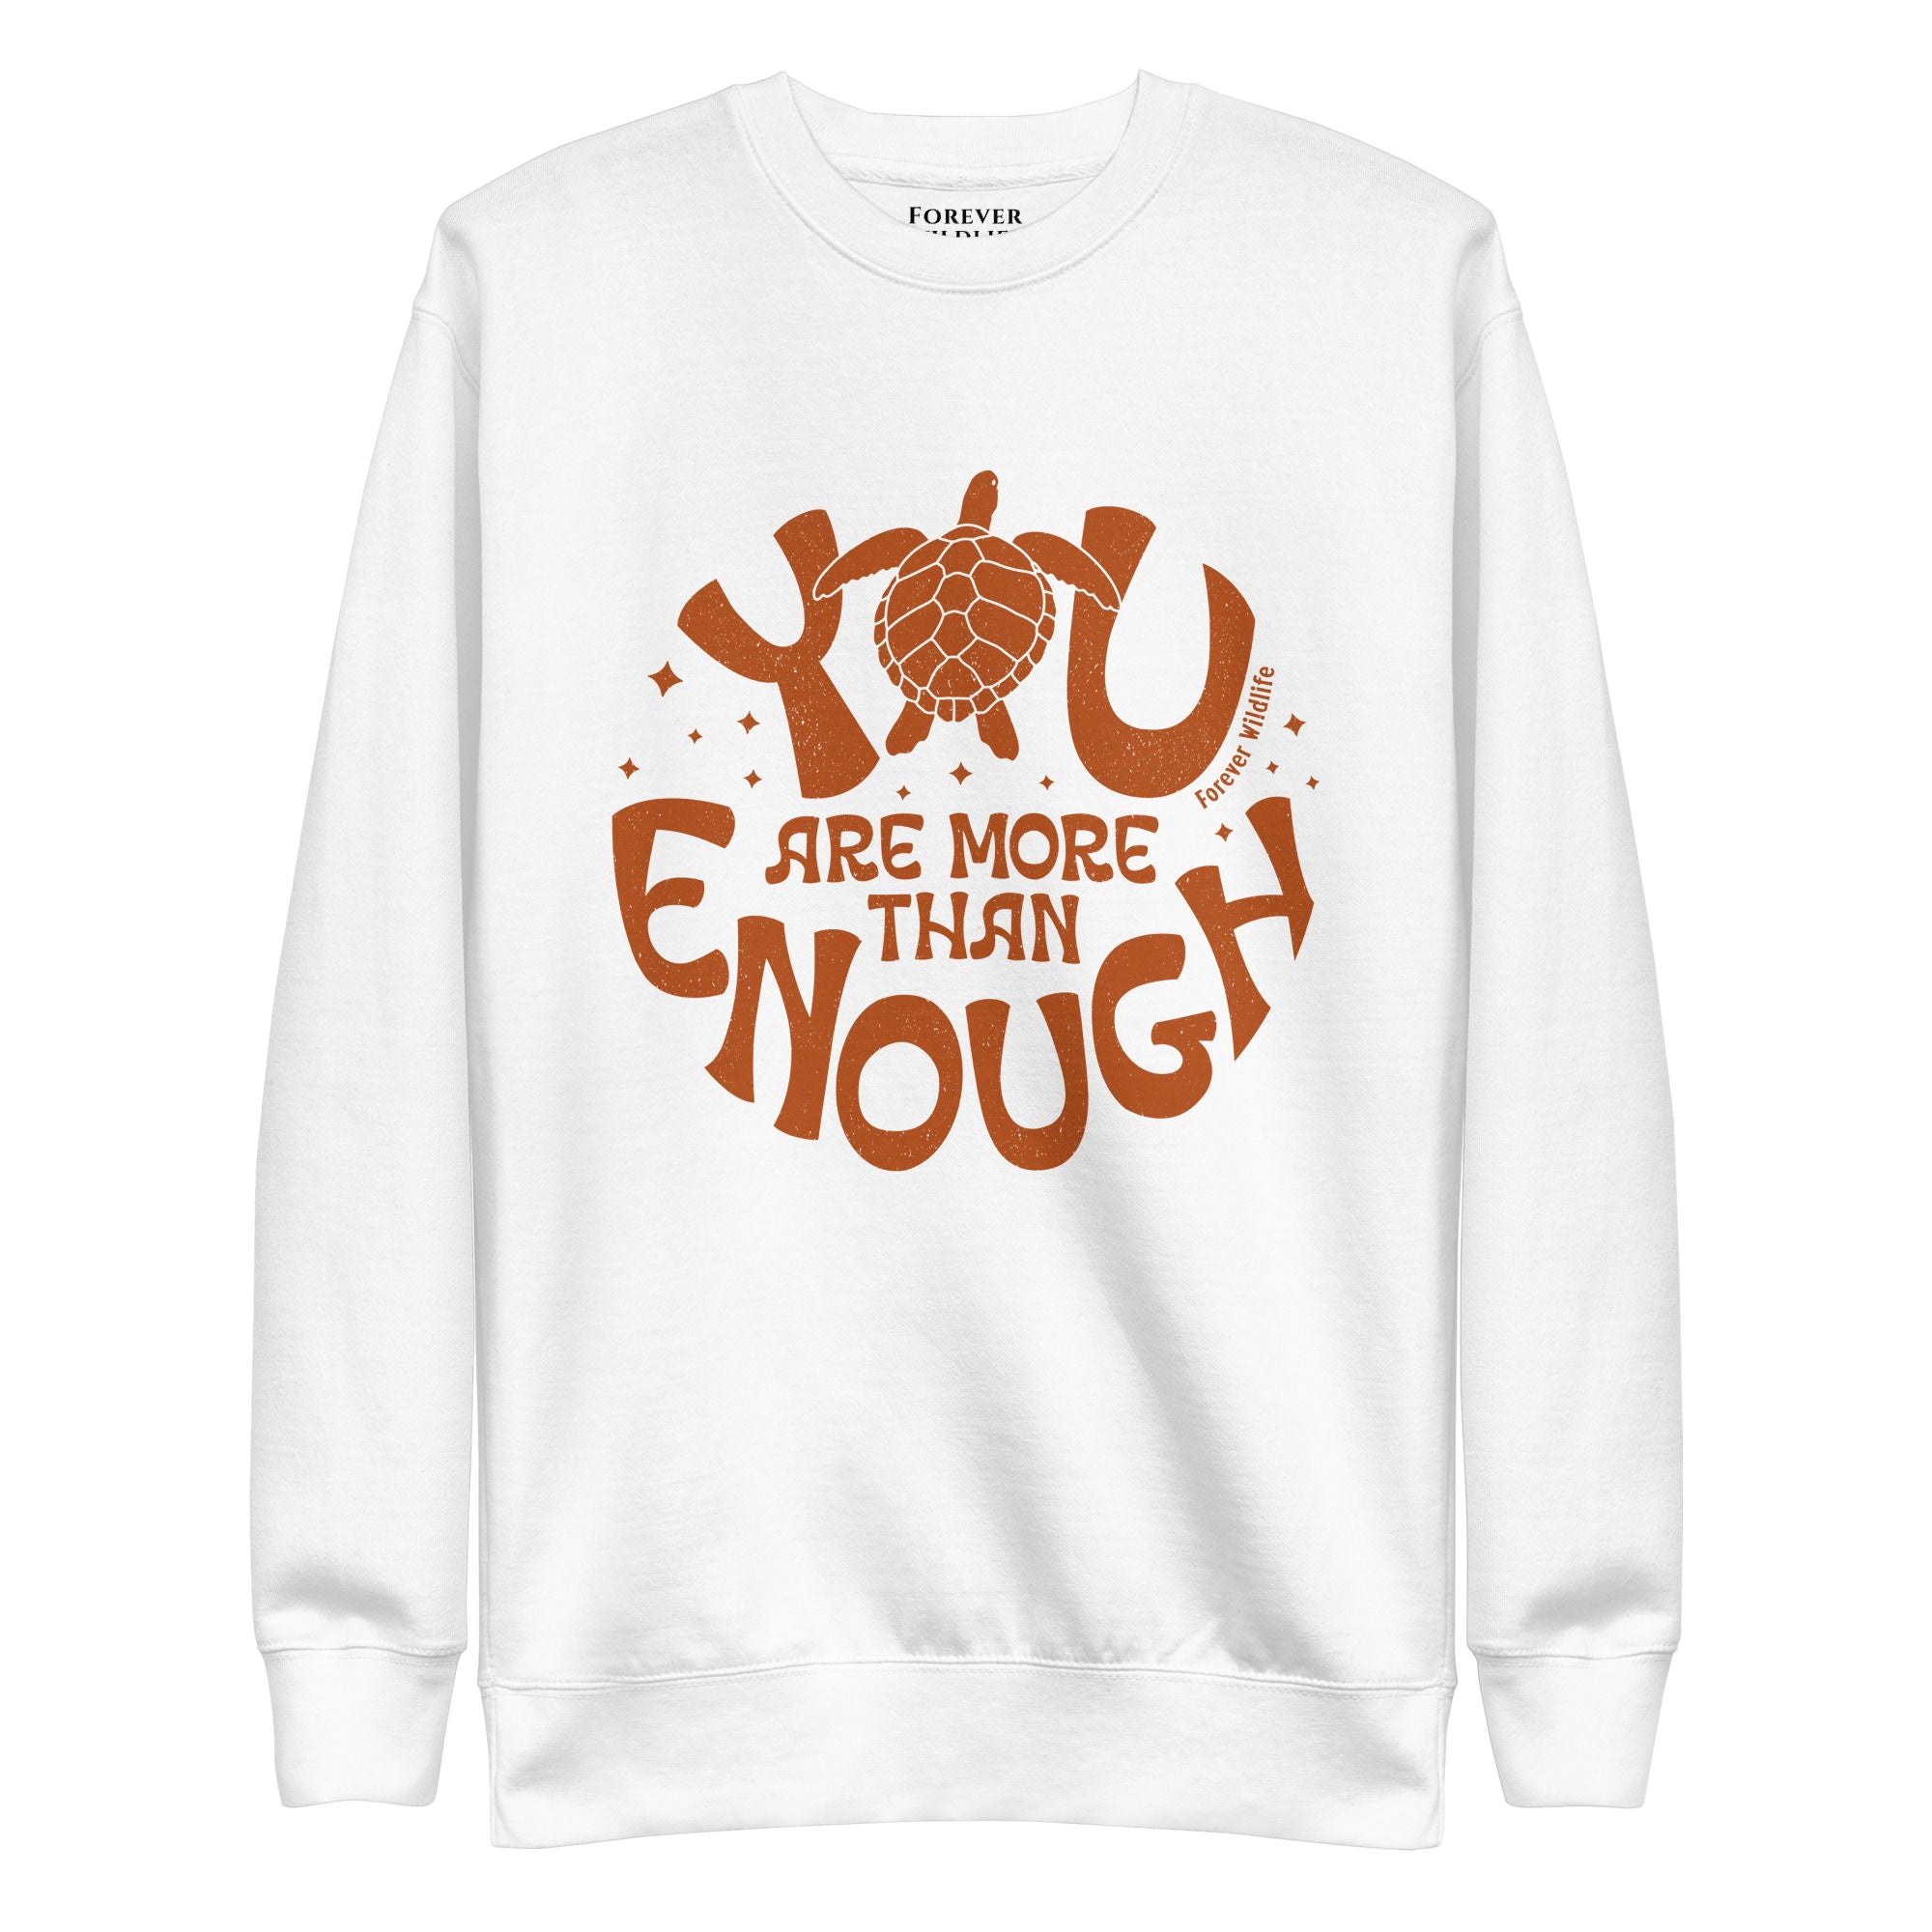 Sea Turtle Sweatshirt in White-Premium Wildlife Animal Inspiration Sweatshirt Design with 'You Are More Than Enough' text, part of Wildlife Sweatshirts & Clothing from Forever Wildlife.